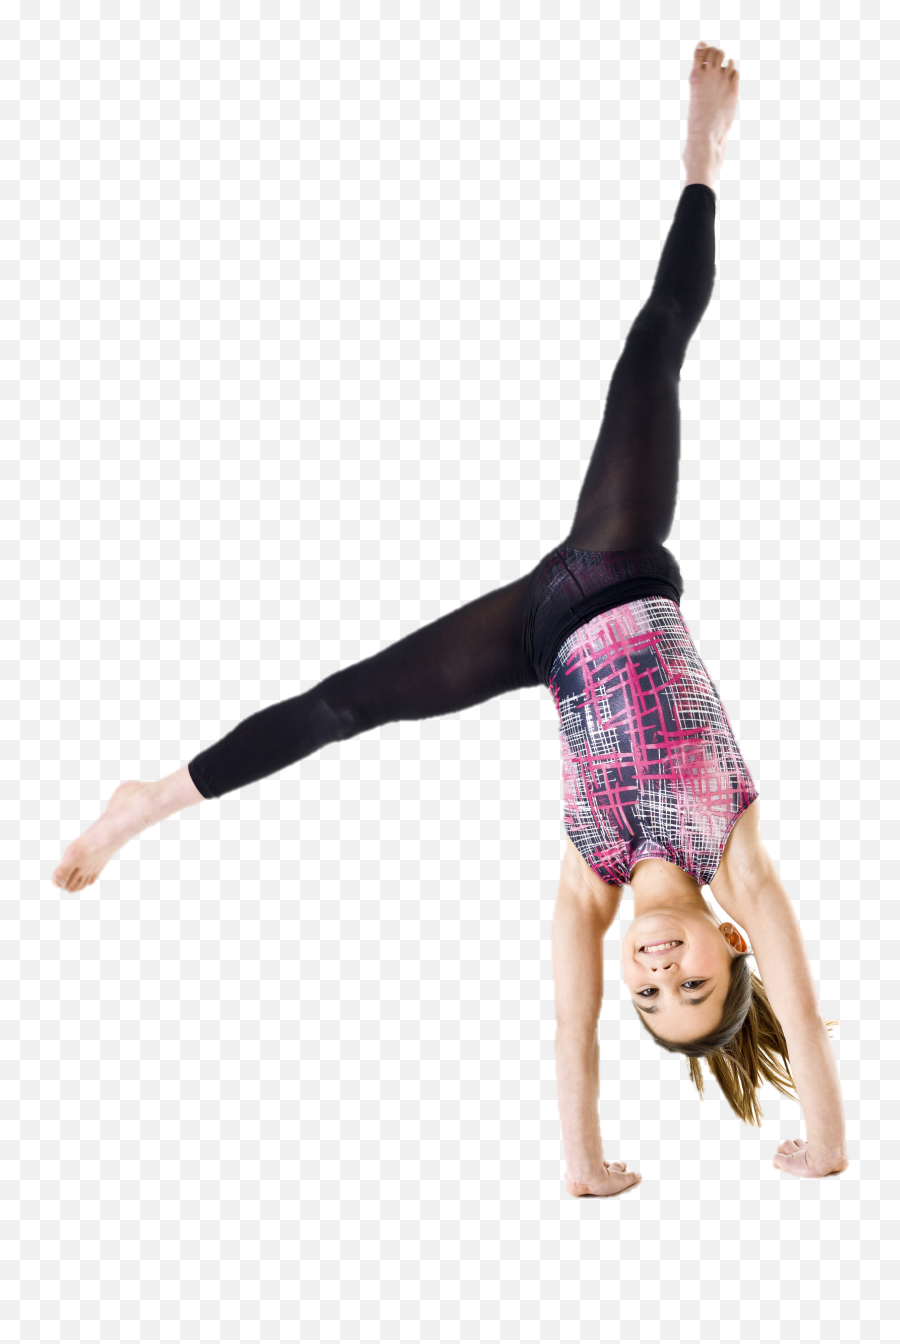 Gymnast Png Images In Collection - Gymnastics Girl White Background,Gymnast Png